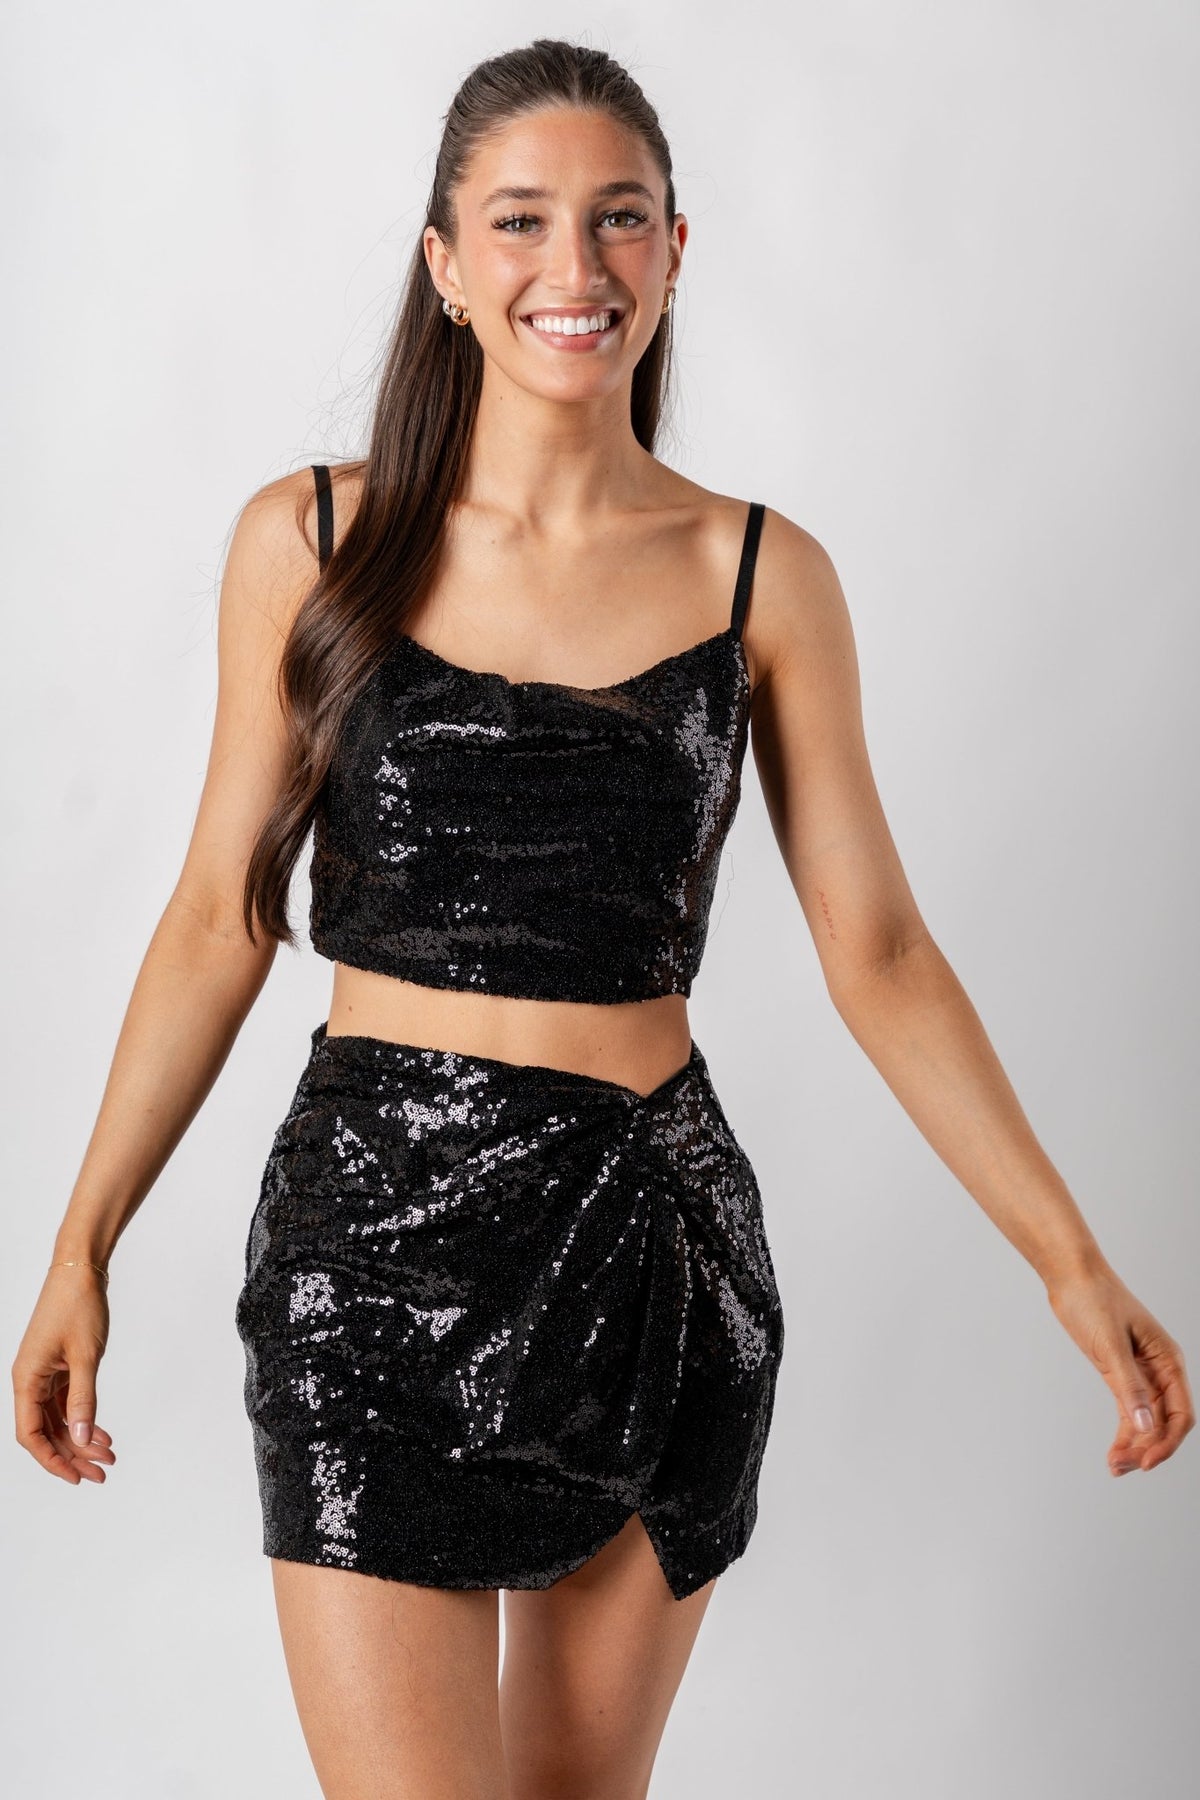 Sequin crop top black - Trendy New Year's Eve Outfits at Lush Fashion Lounge Boutique in Oklahoma City